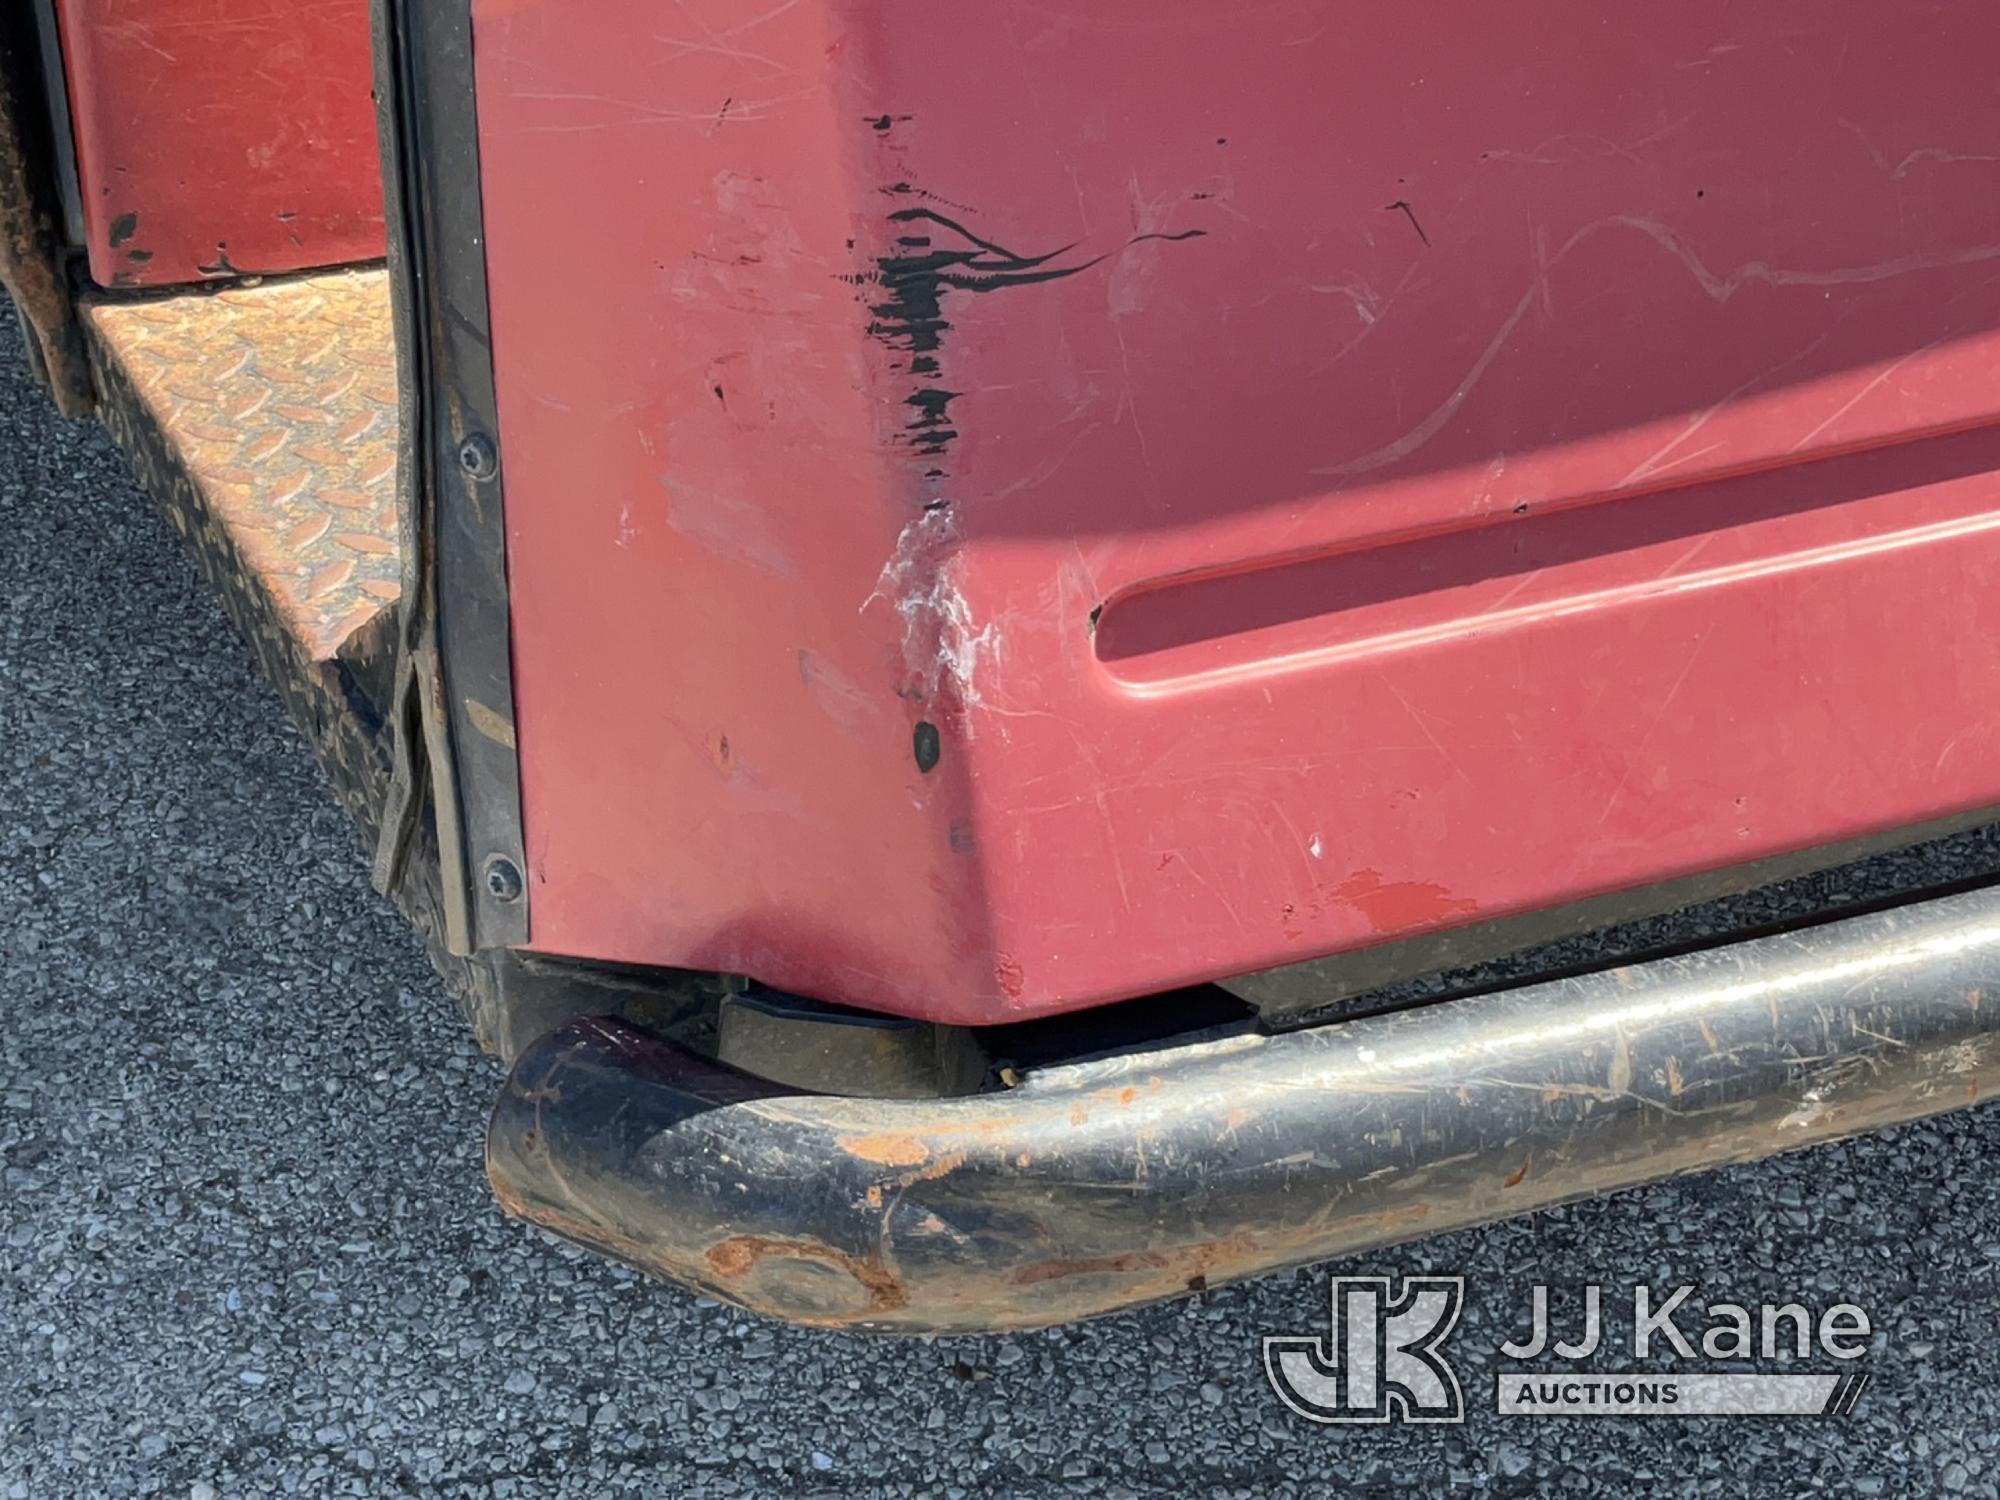 (South Beloit, IL) UNKN Toro Workman 3200 All-Terrain Vehicle Runs & Does Not Move) (Front Tire and